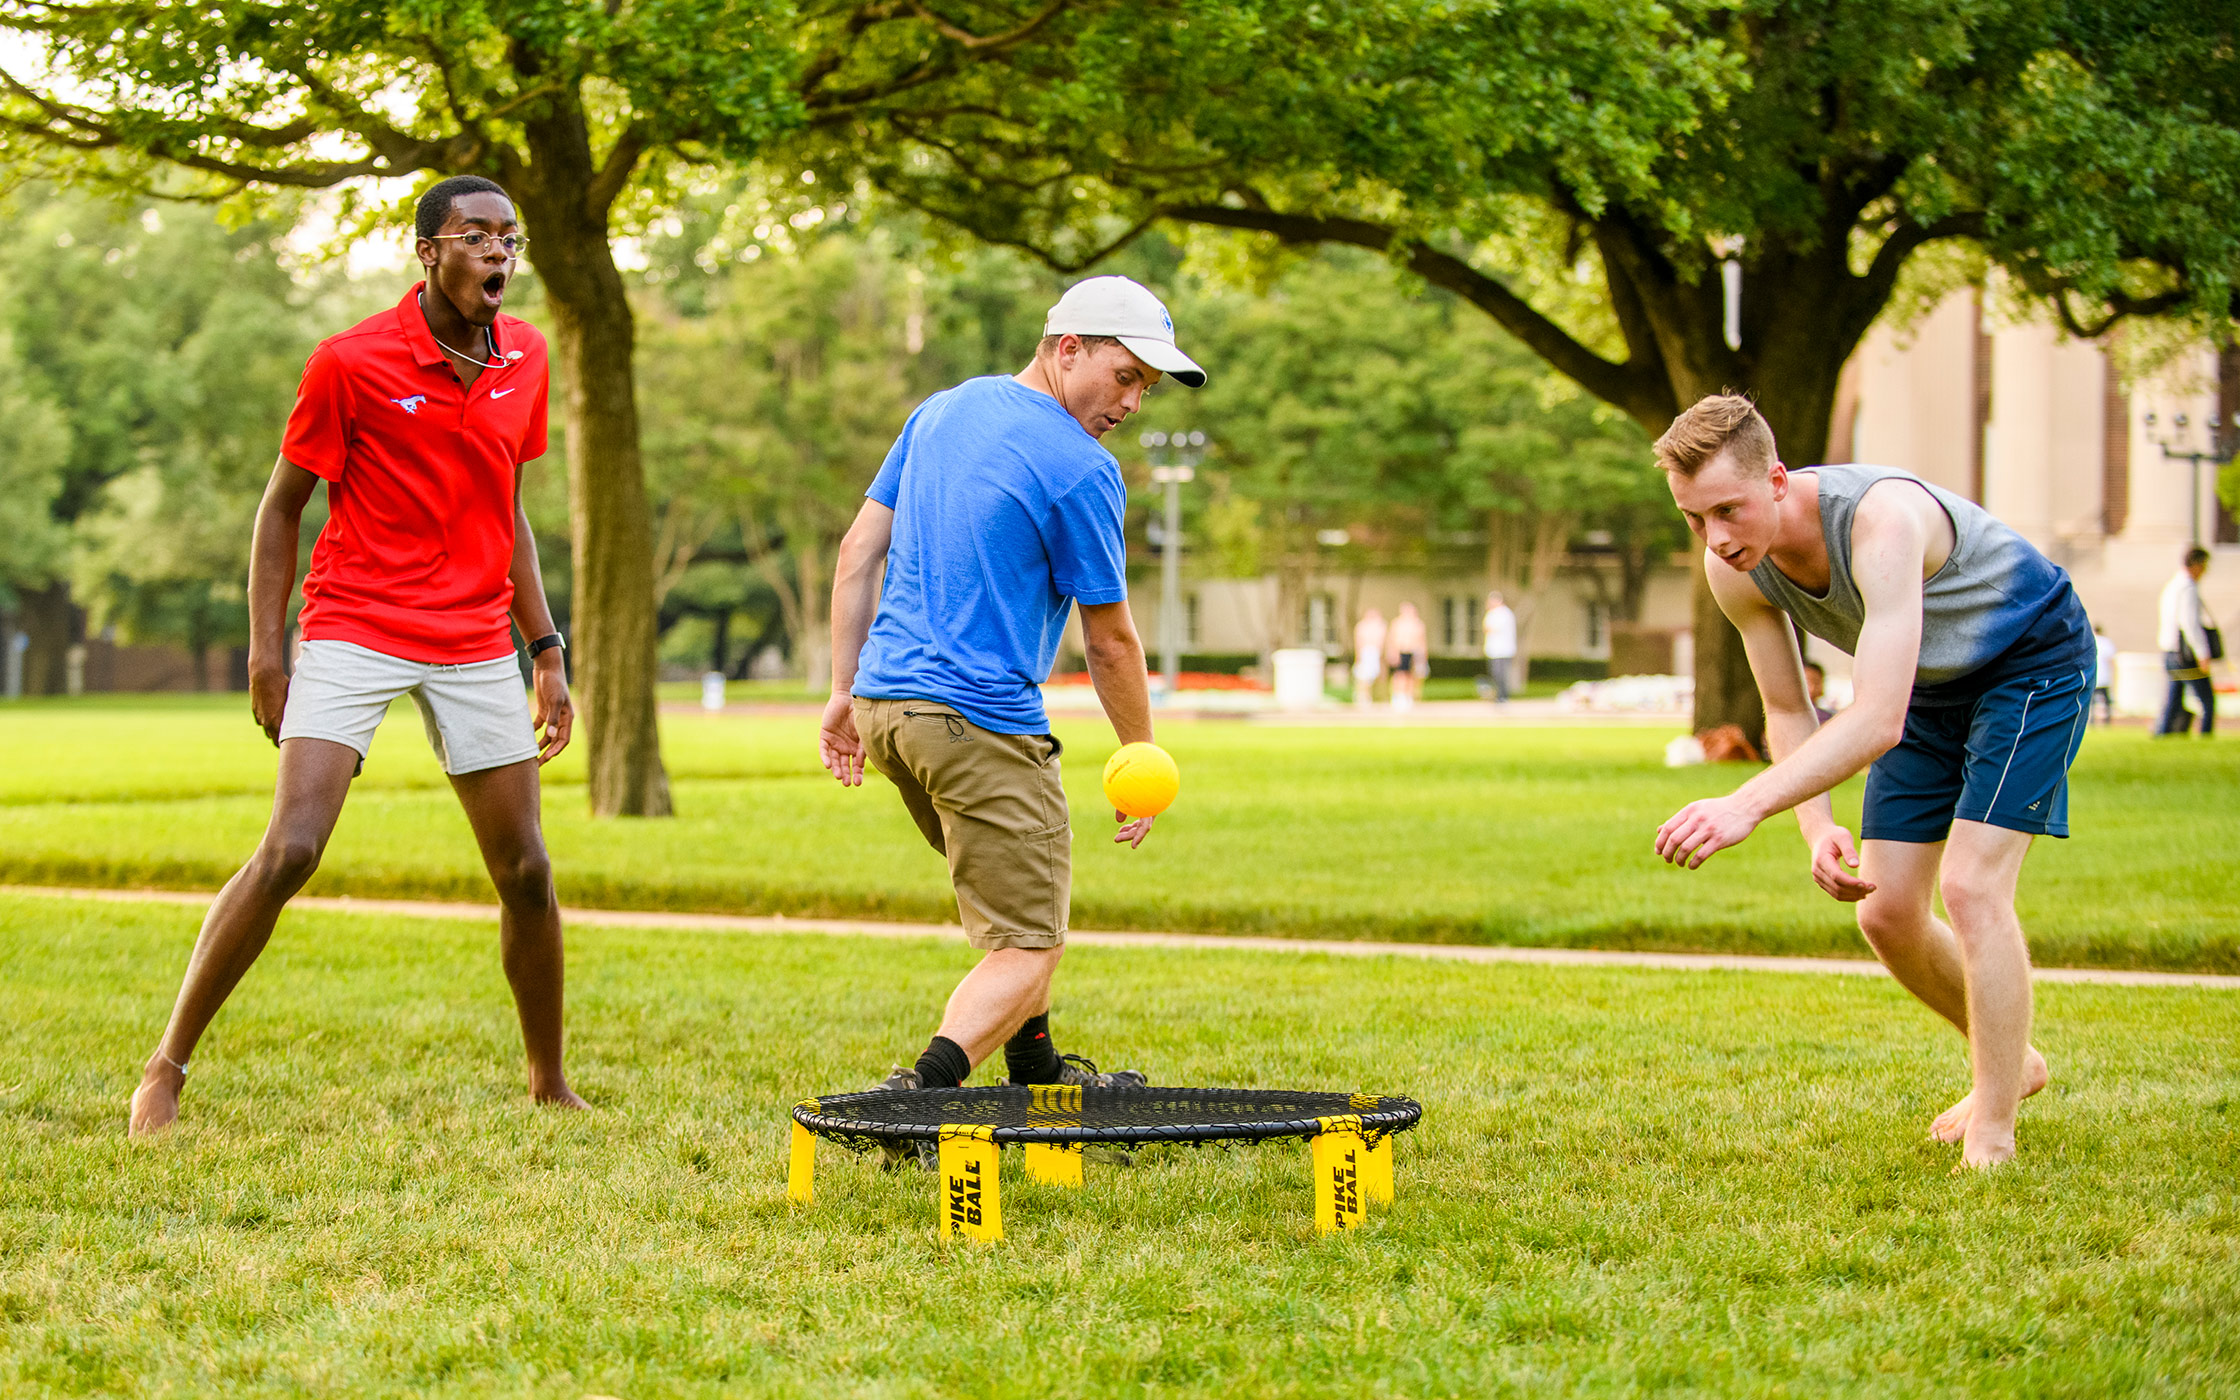 Three SMU students playing a game outside